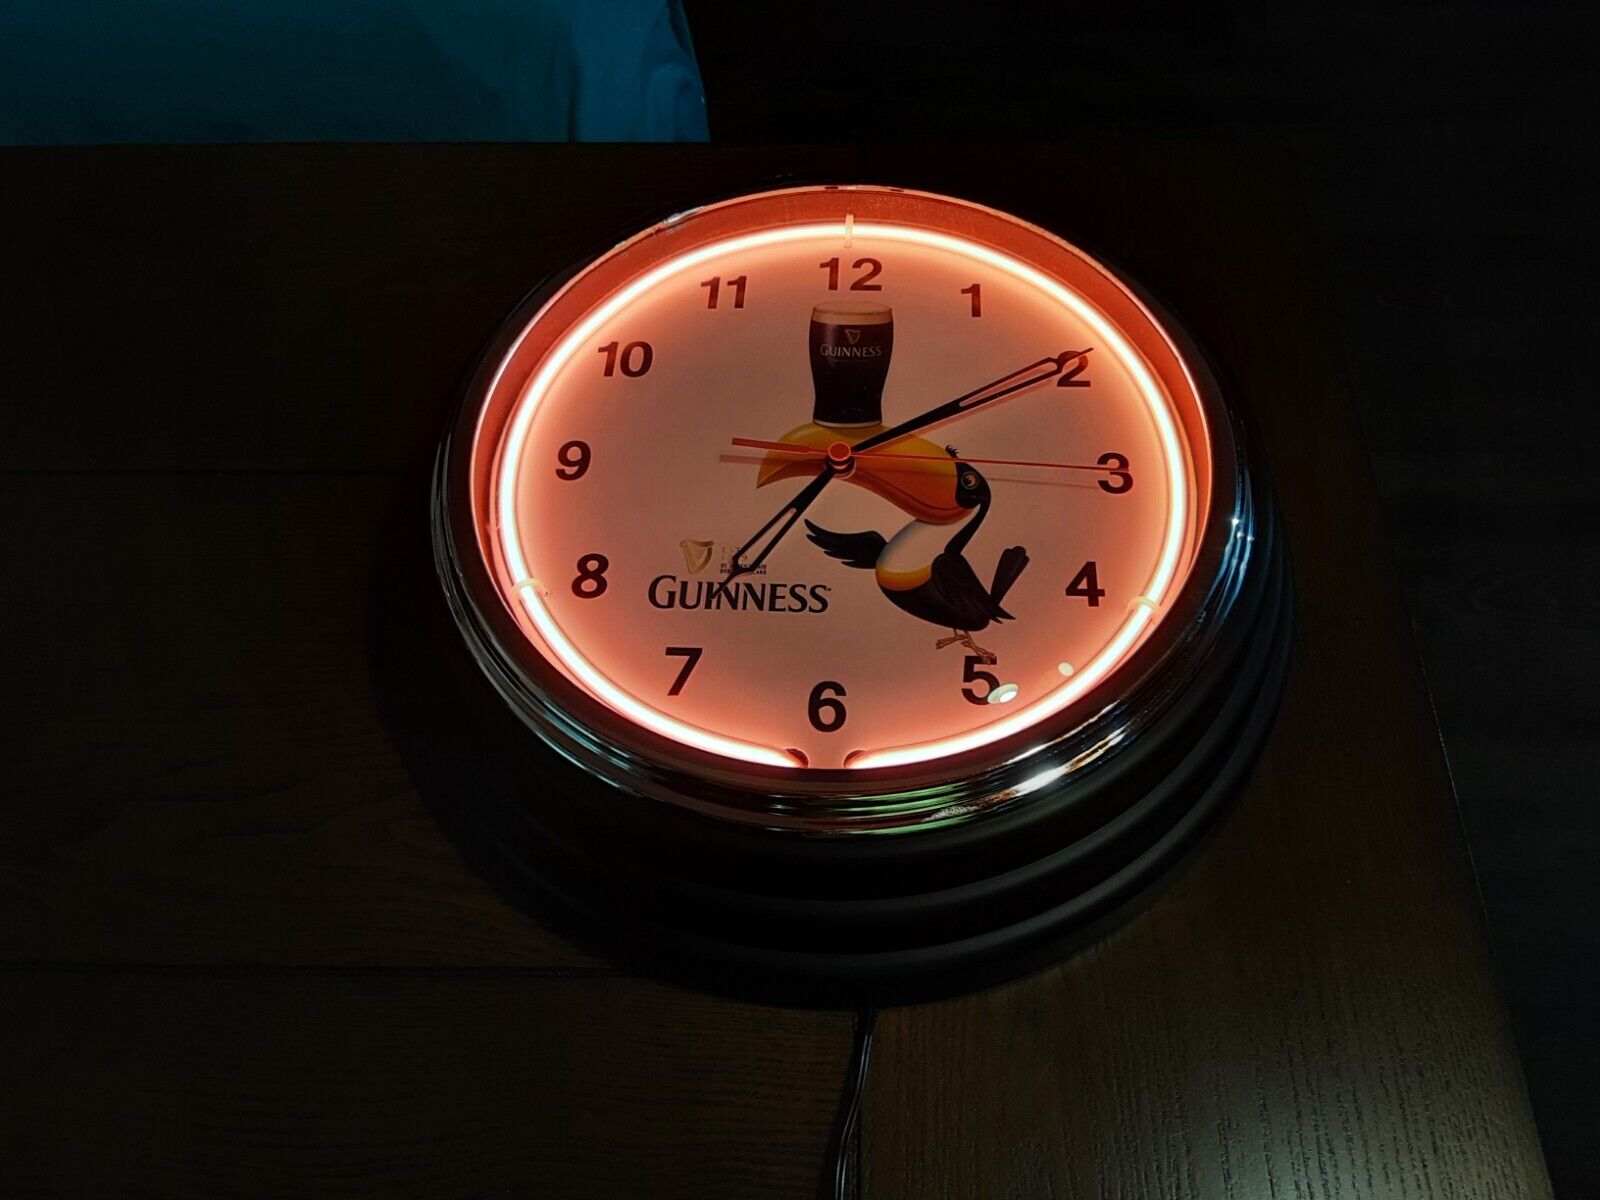 10 Inch GUINNESS CLOCK (NEON ORANGE BATTERY AND POWER CORD)